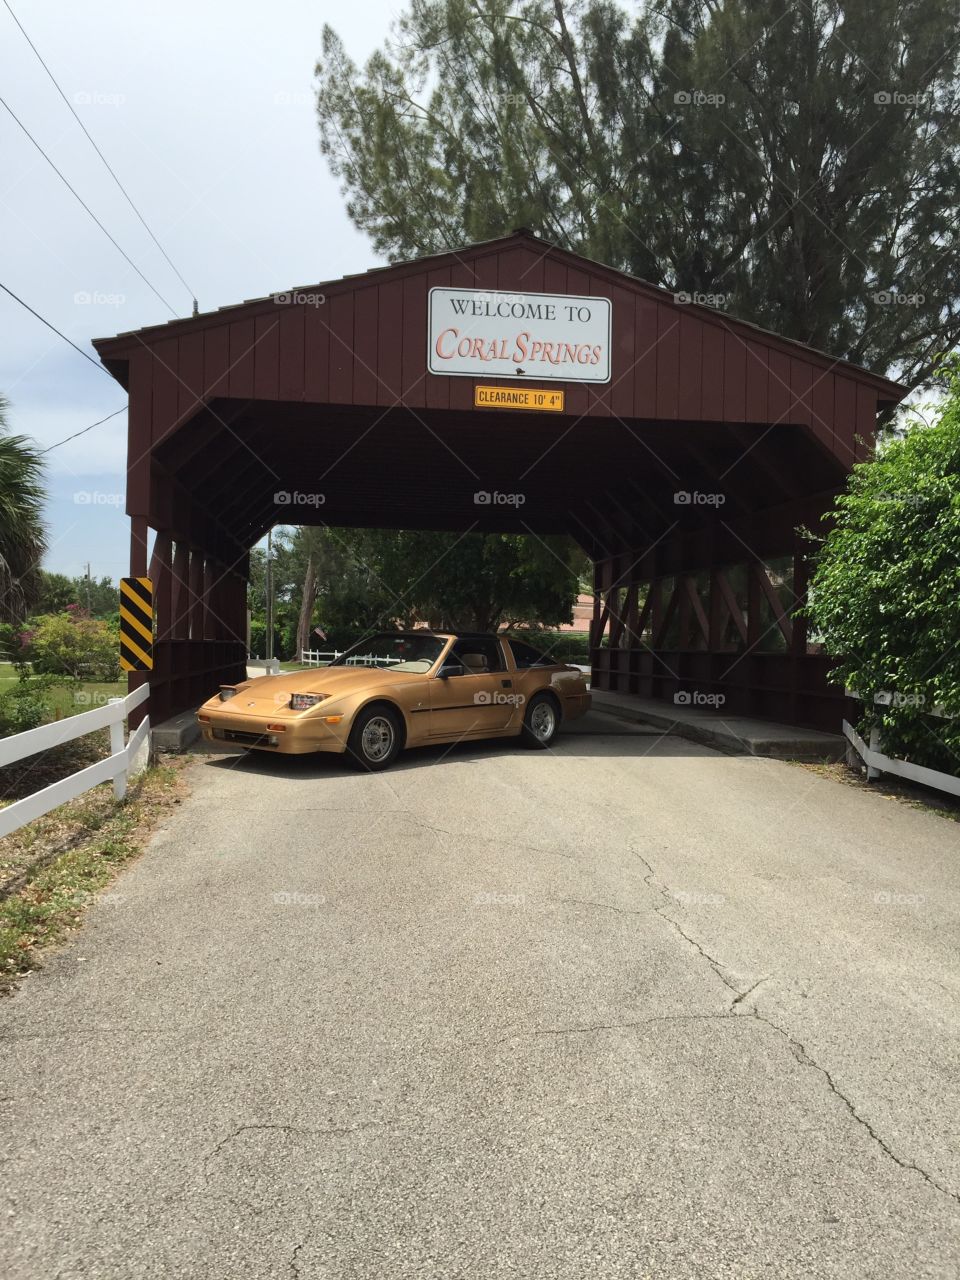 300zx at the Coral Springs bridge